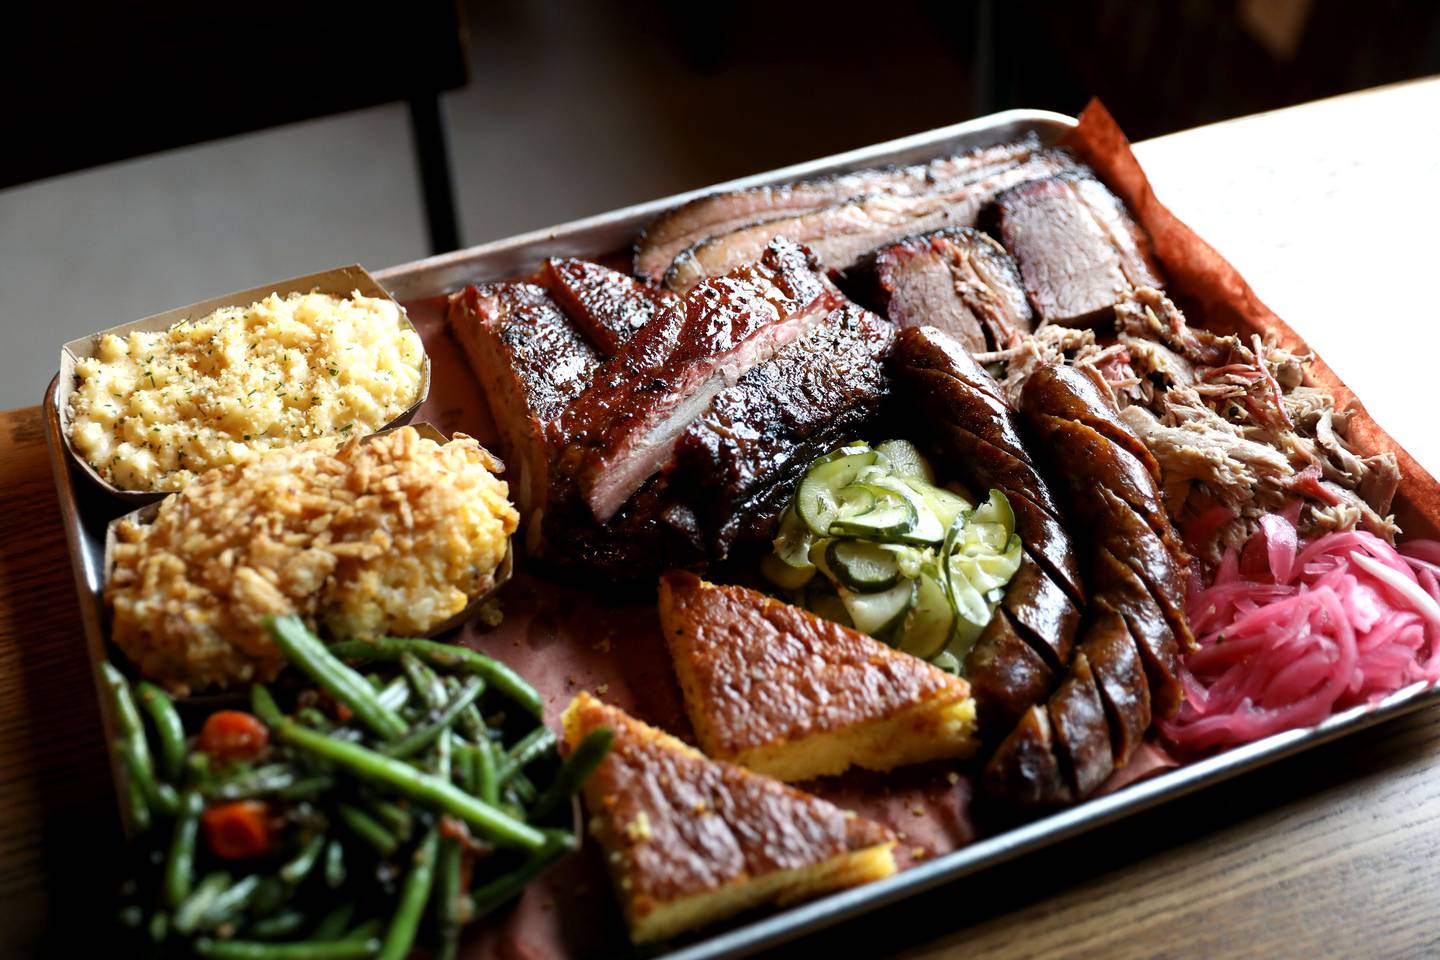 Hot links, pickled onions, house-made spicy pickles, brisket, pulled park, corn bread, pork spare ribs, green beans, tater tot casserole and macaroni and cheese at Station One Smokehouse, which recently opened at 524 E. Kendall Dr. in Yorkville.